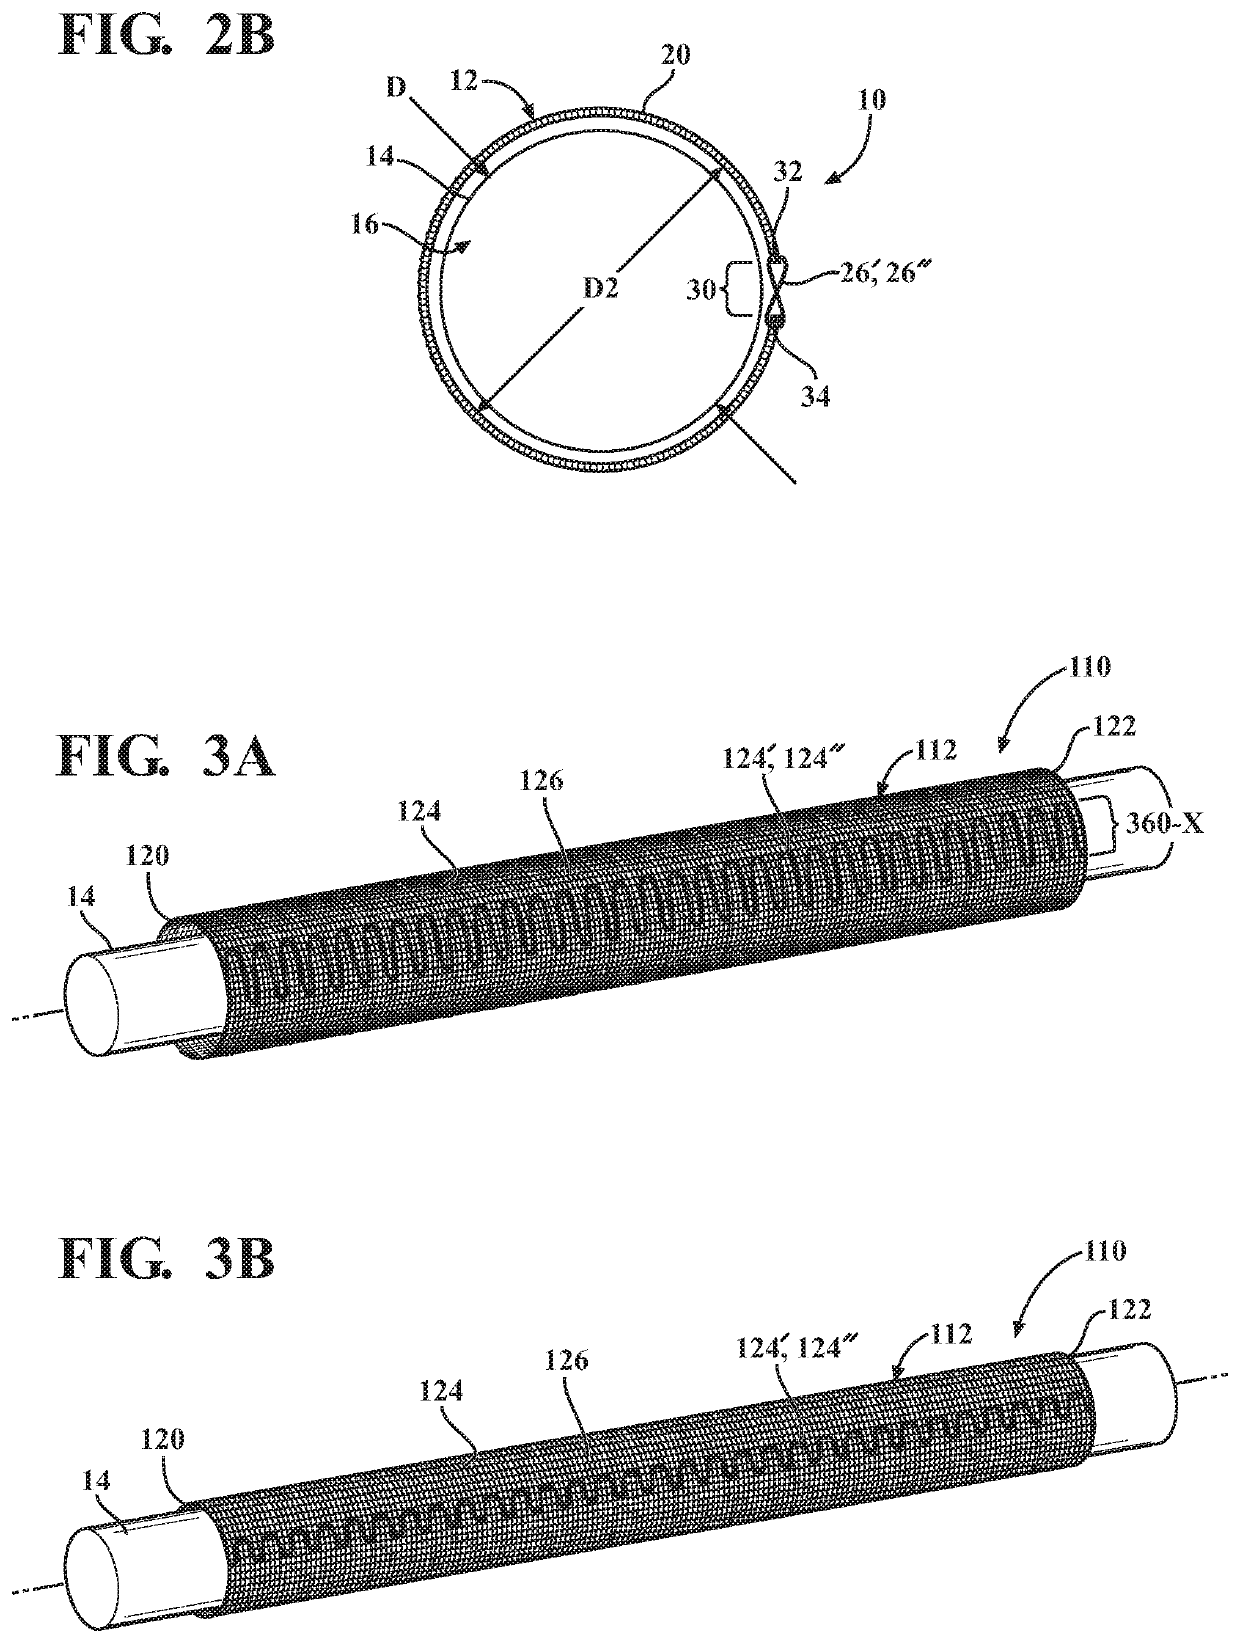 Circumferentially continuous and constrictable textile sleeve and method of construction thereof